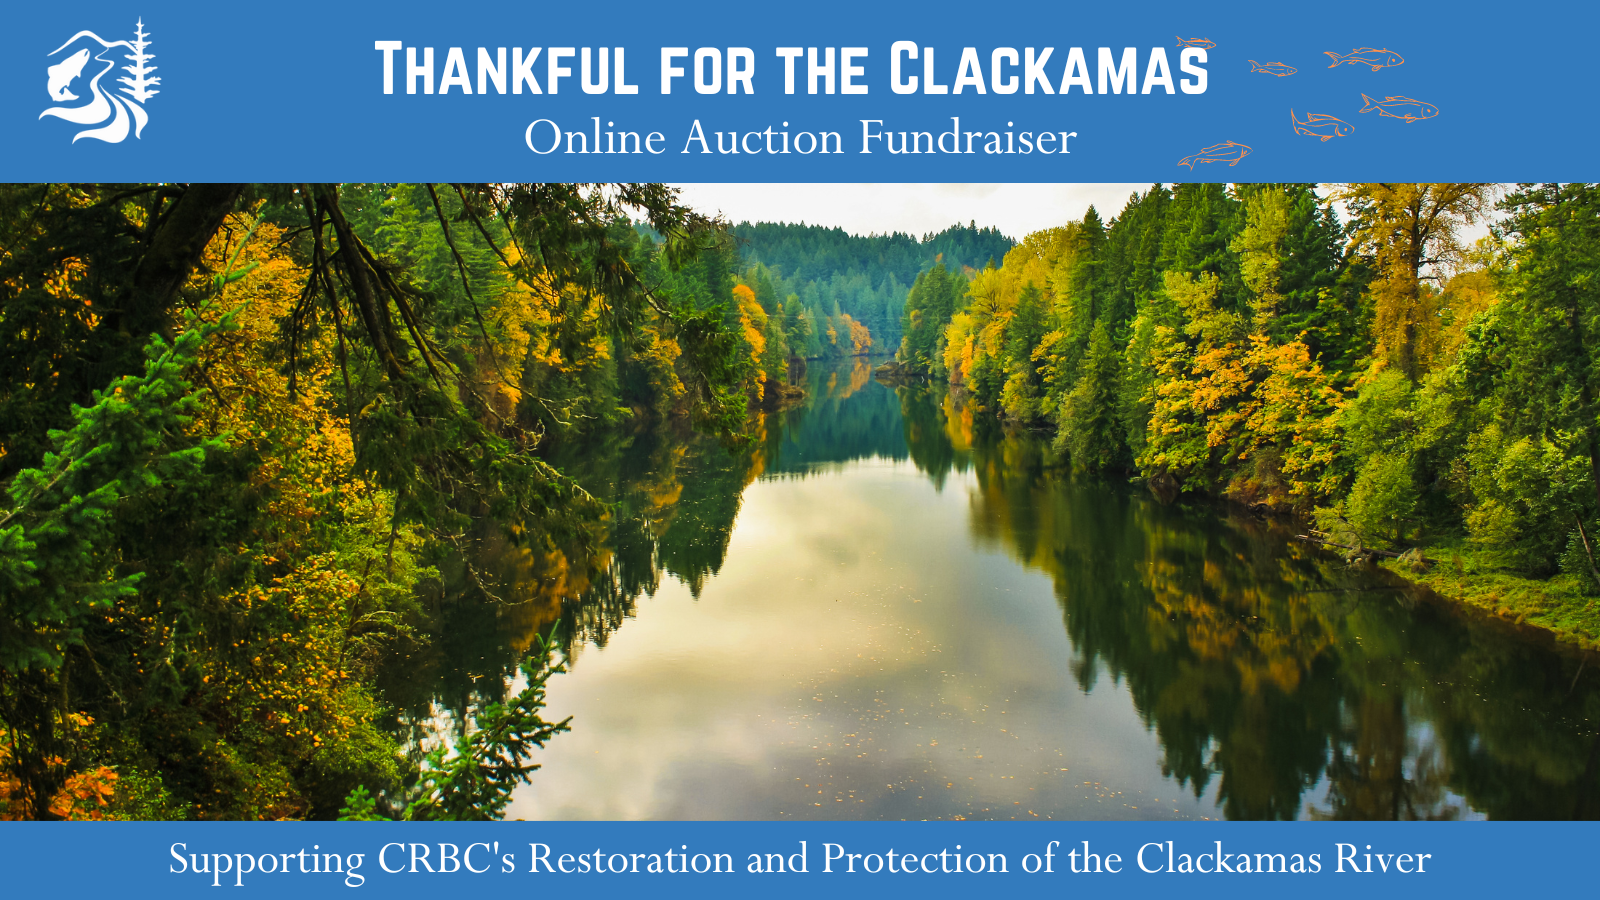 Thankful for the Clackamas Online Auction Fundraiser